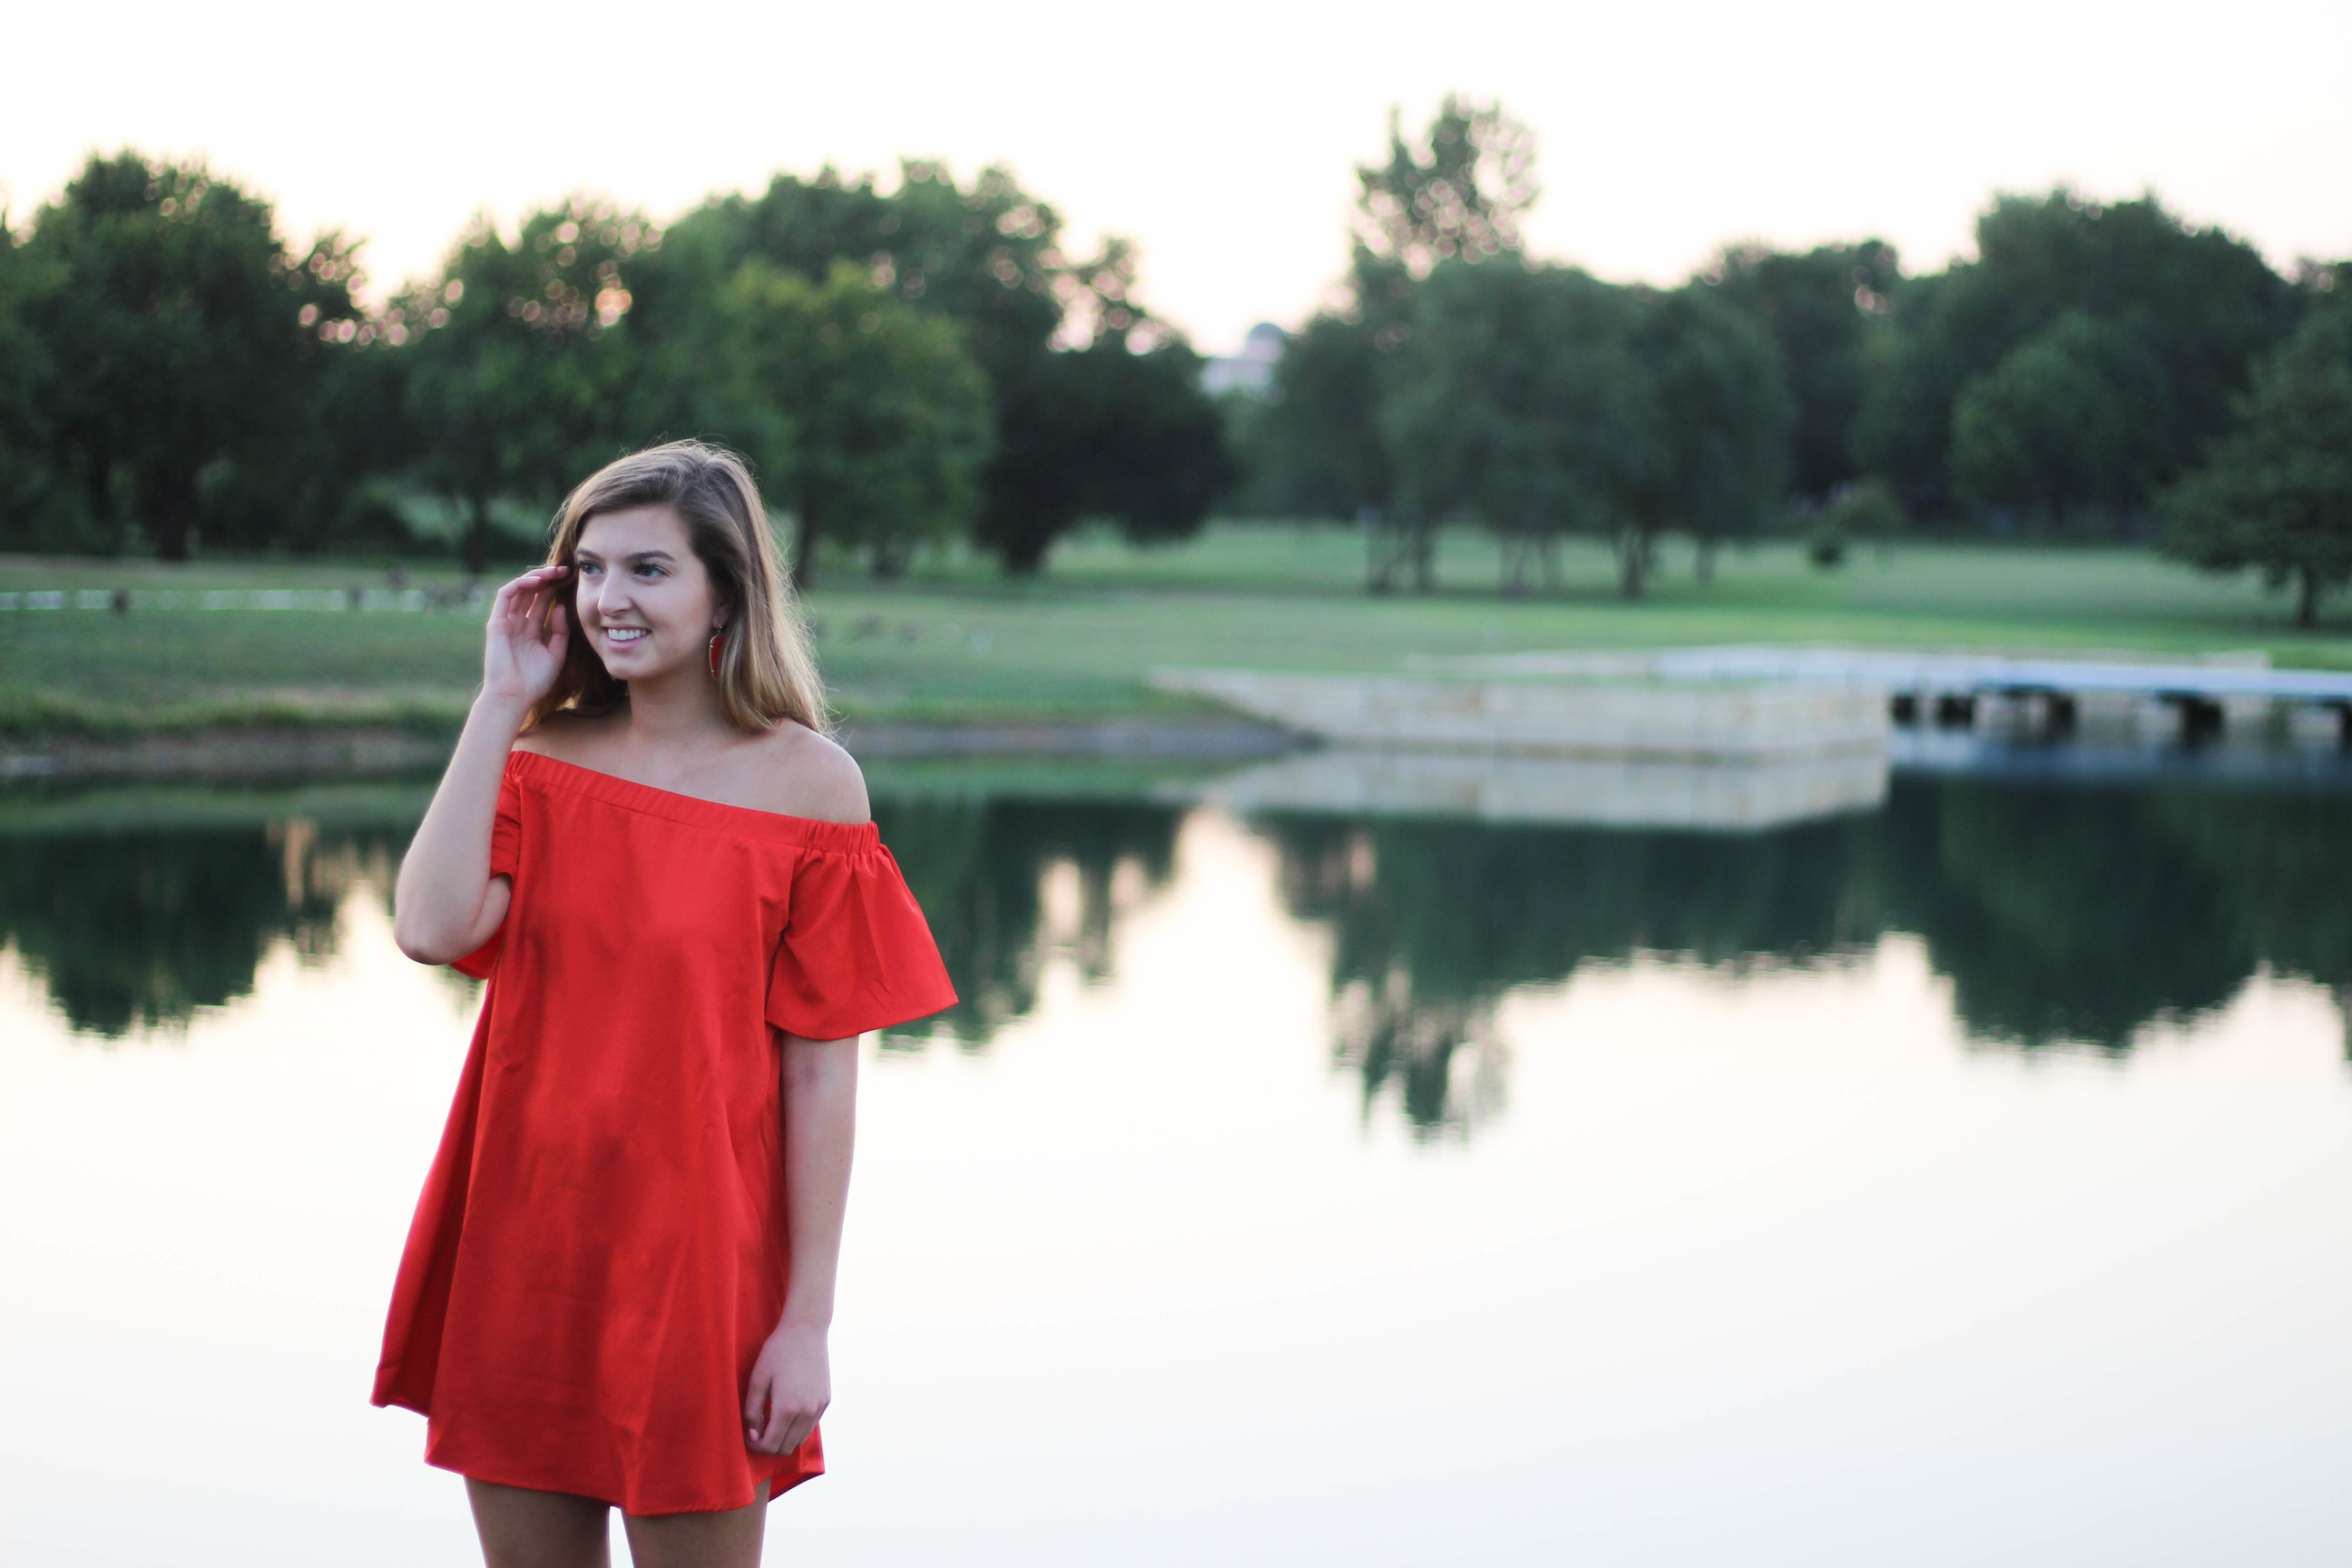 Off the shoulder red dress from Romwe by lauren lindmark on daily dose of charm